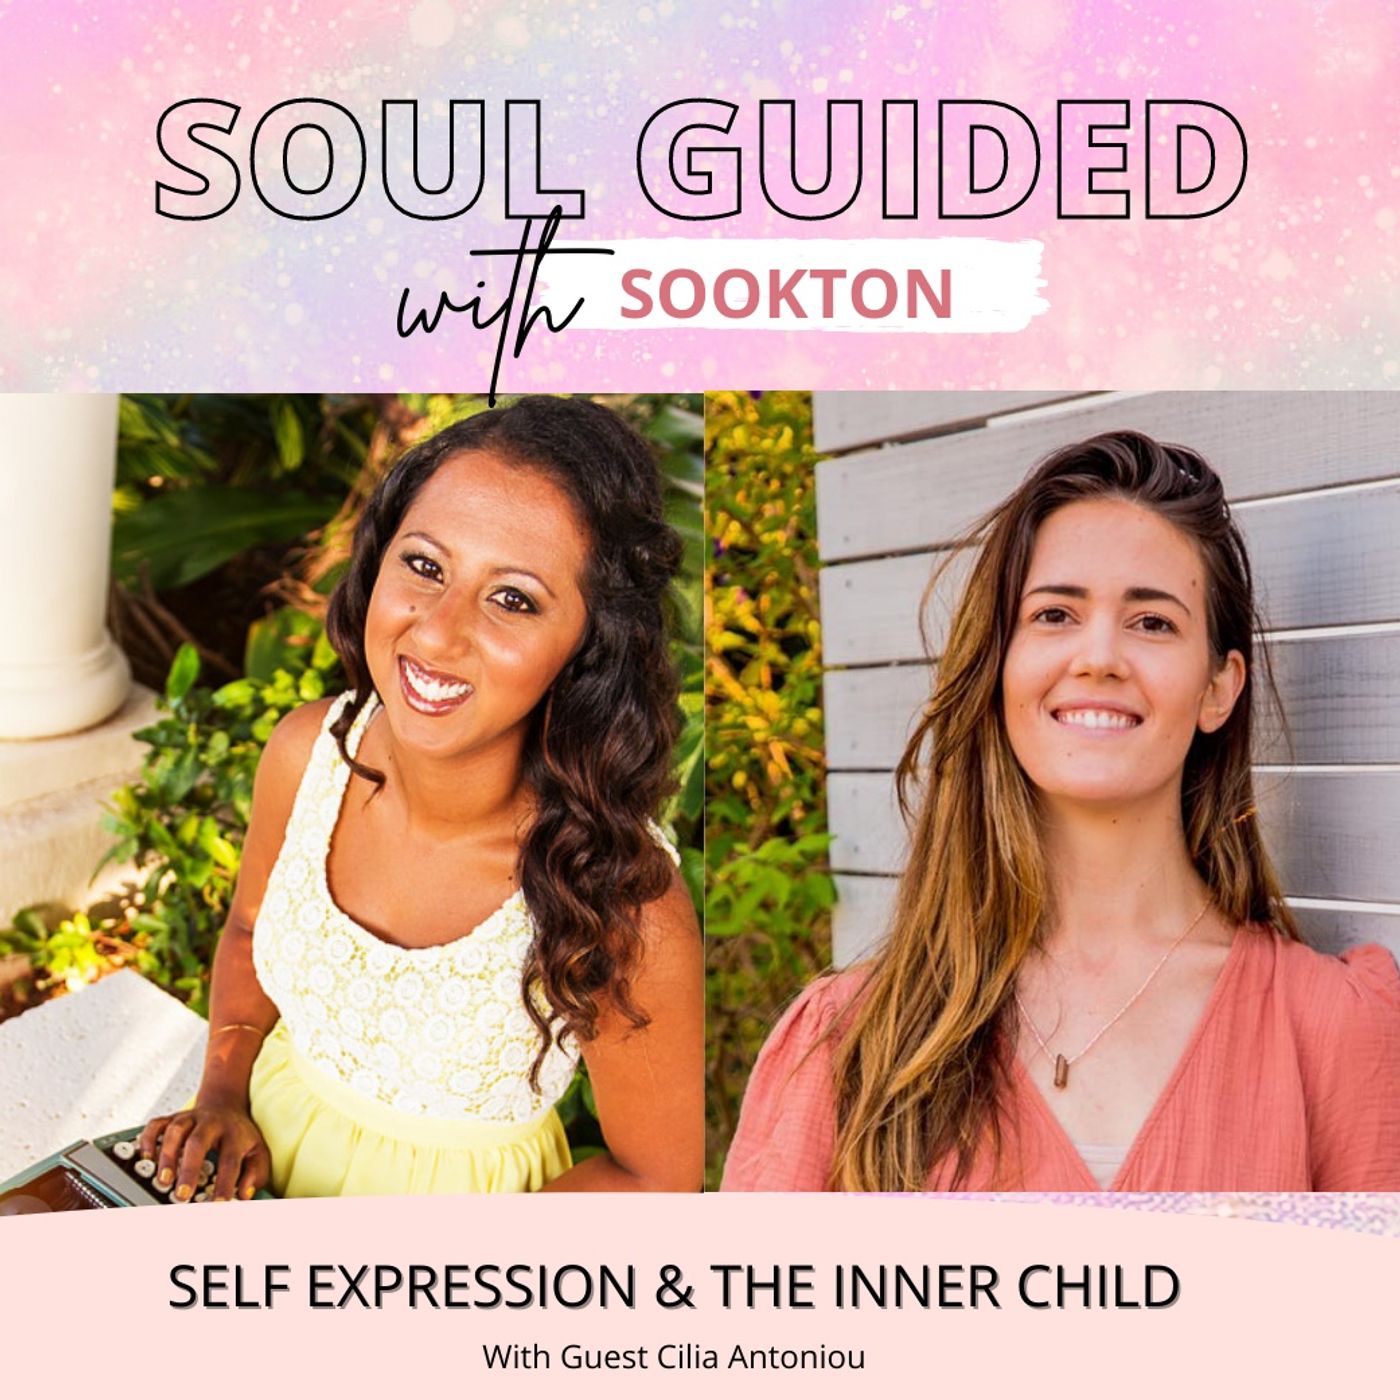 Self Expression & The Inner Child